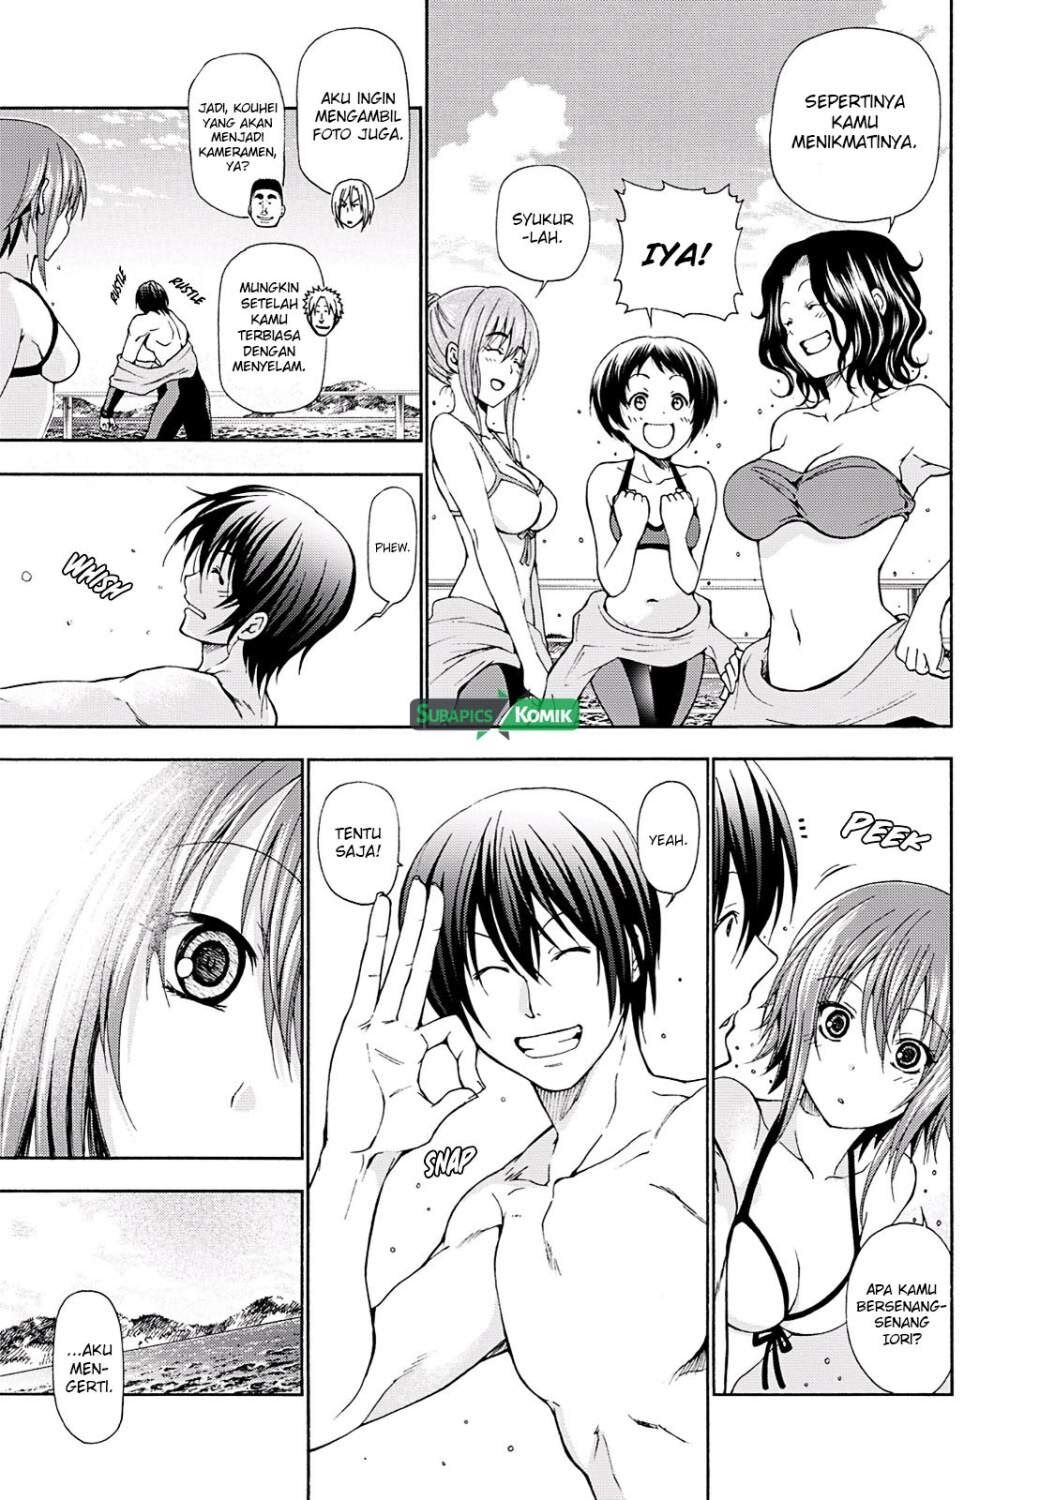 Grand Blue Chapter 11